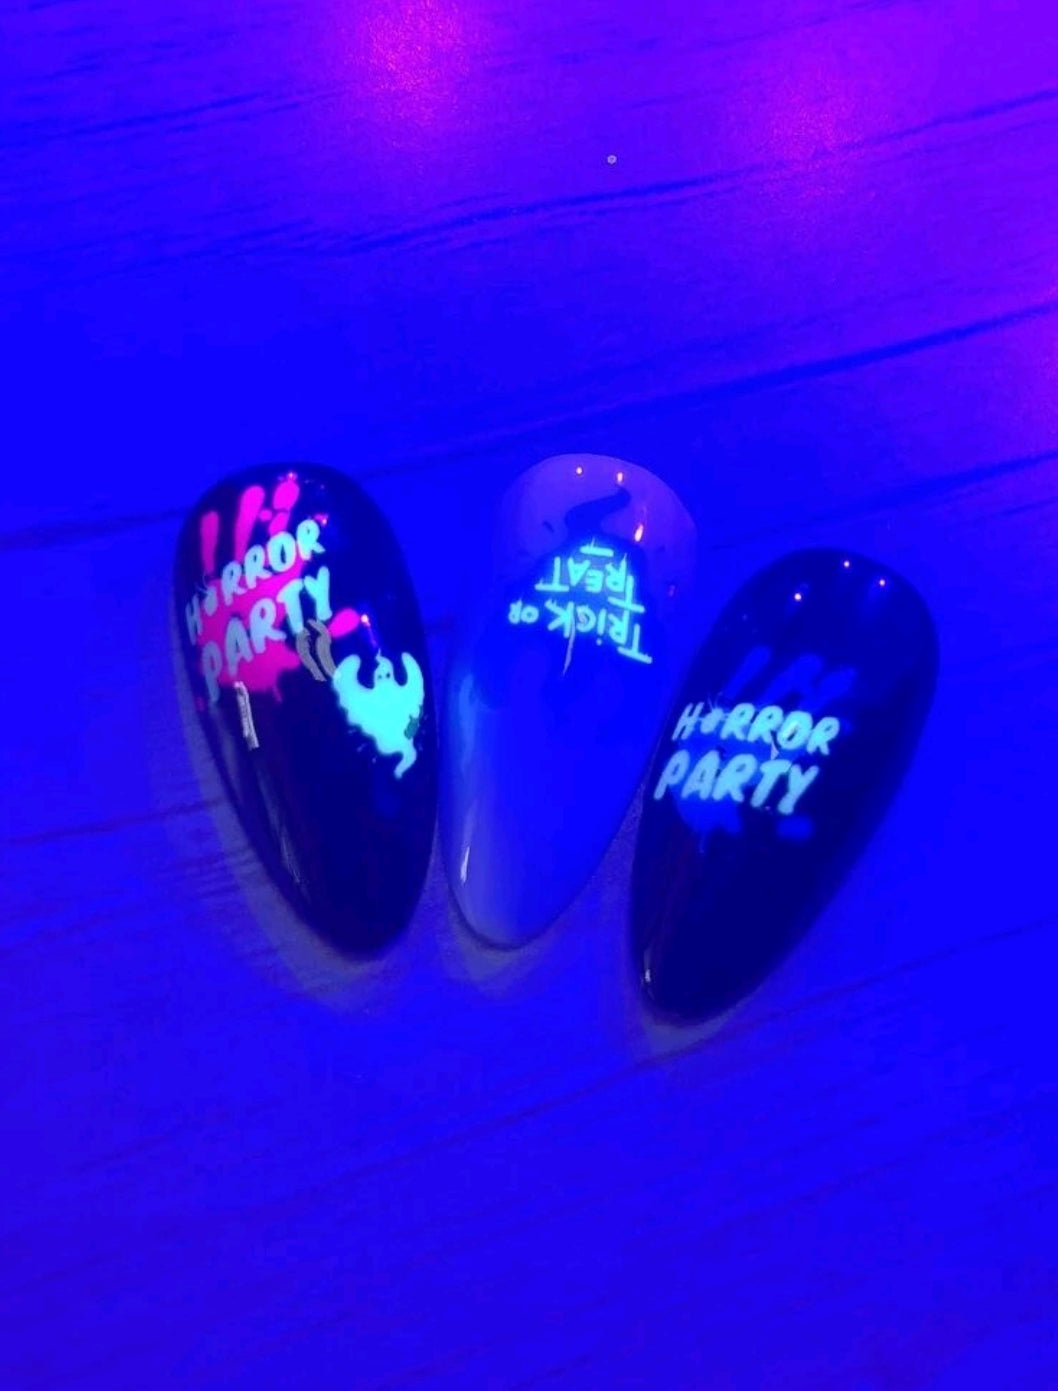 Horror Party Nail Stickers|Glow Stickers